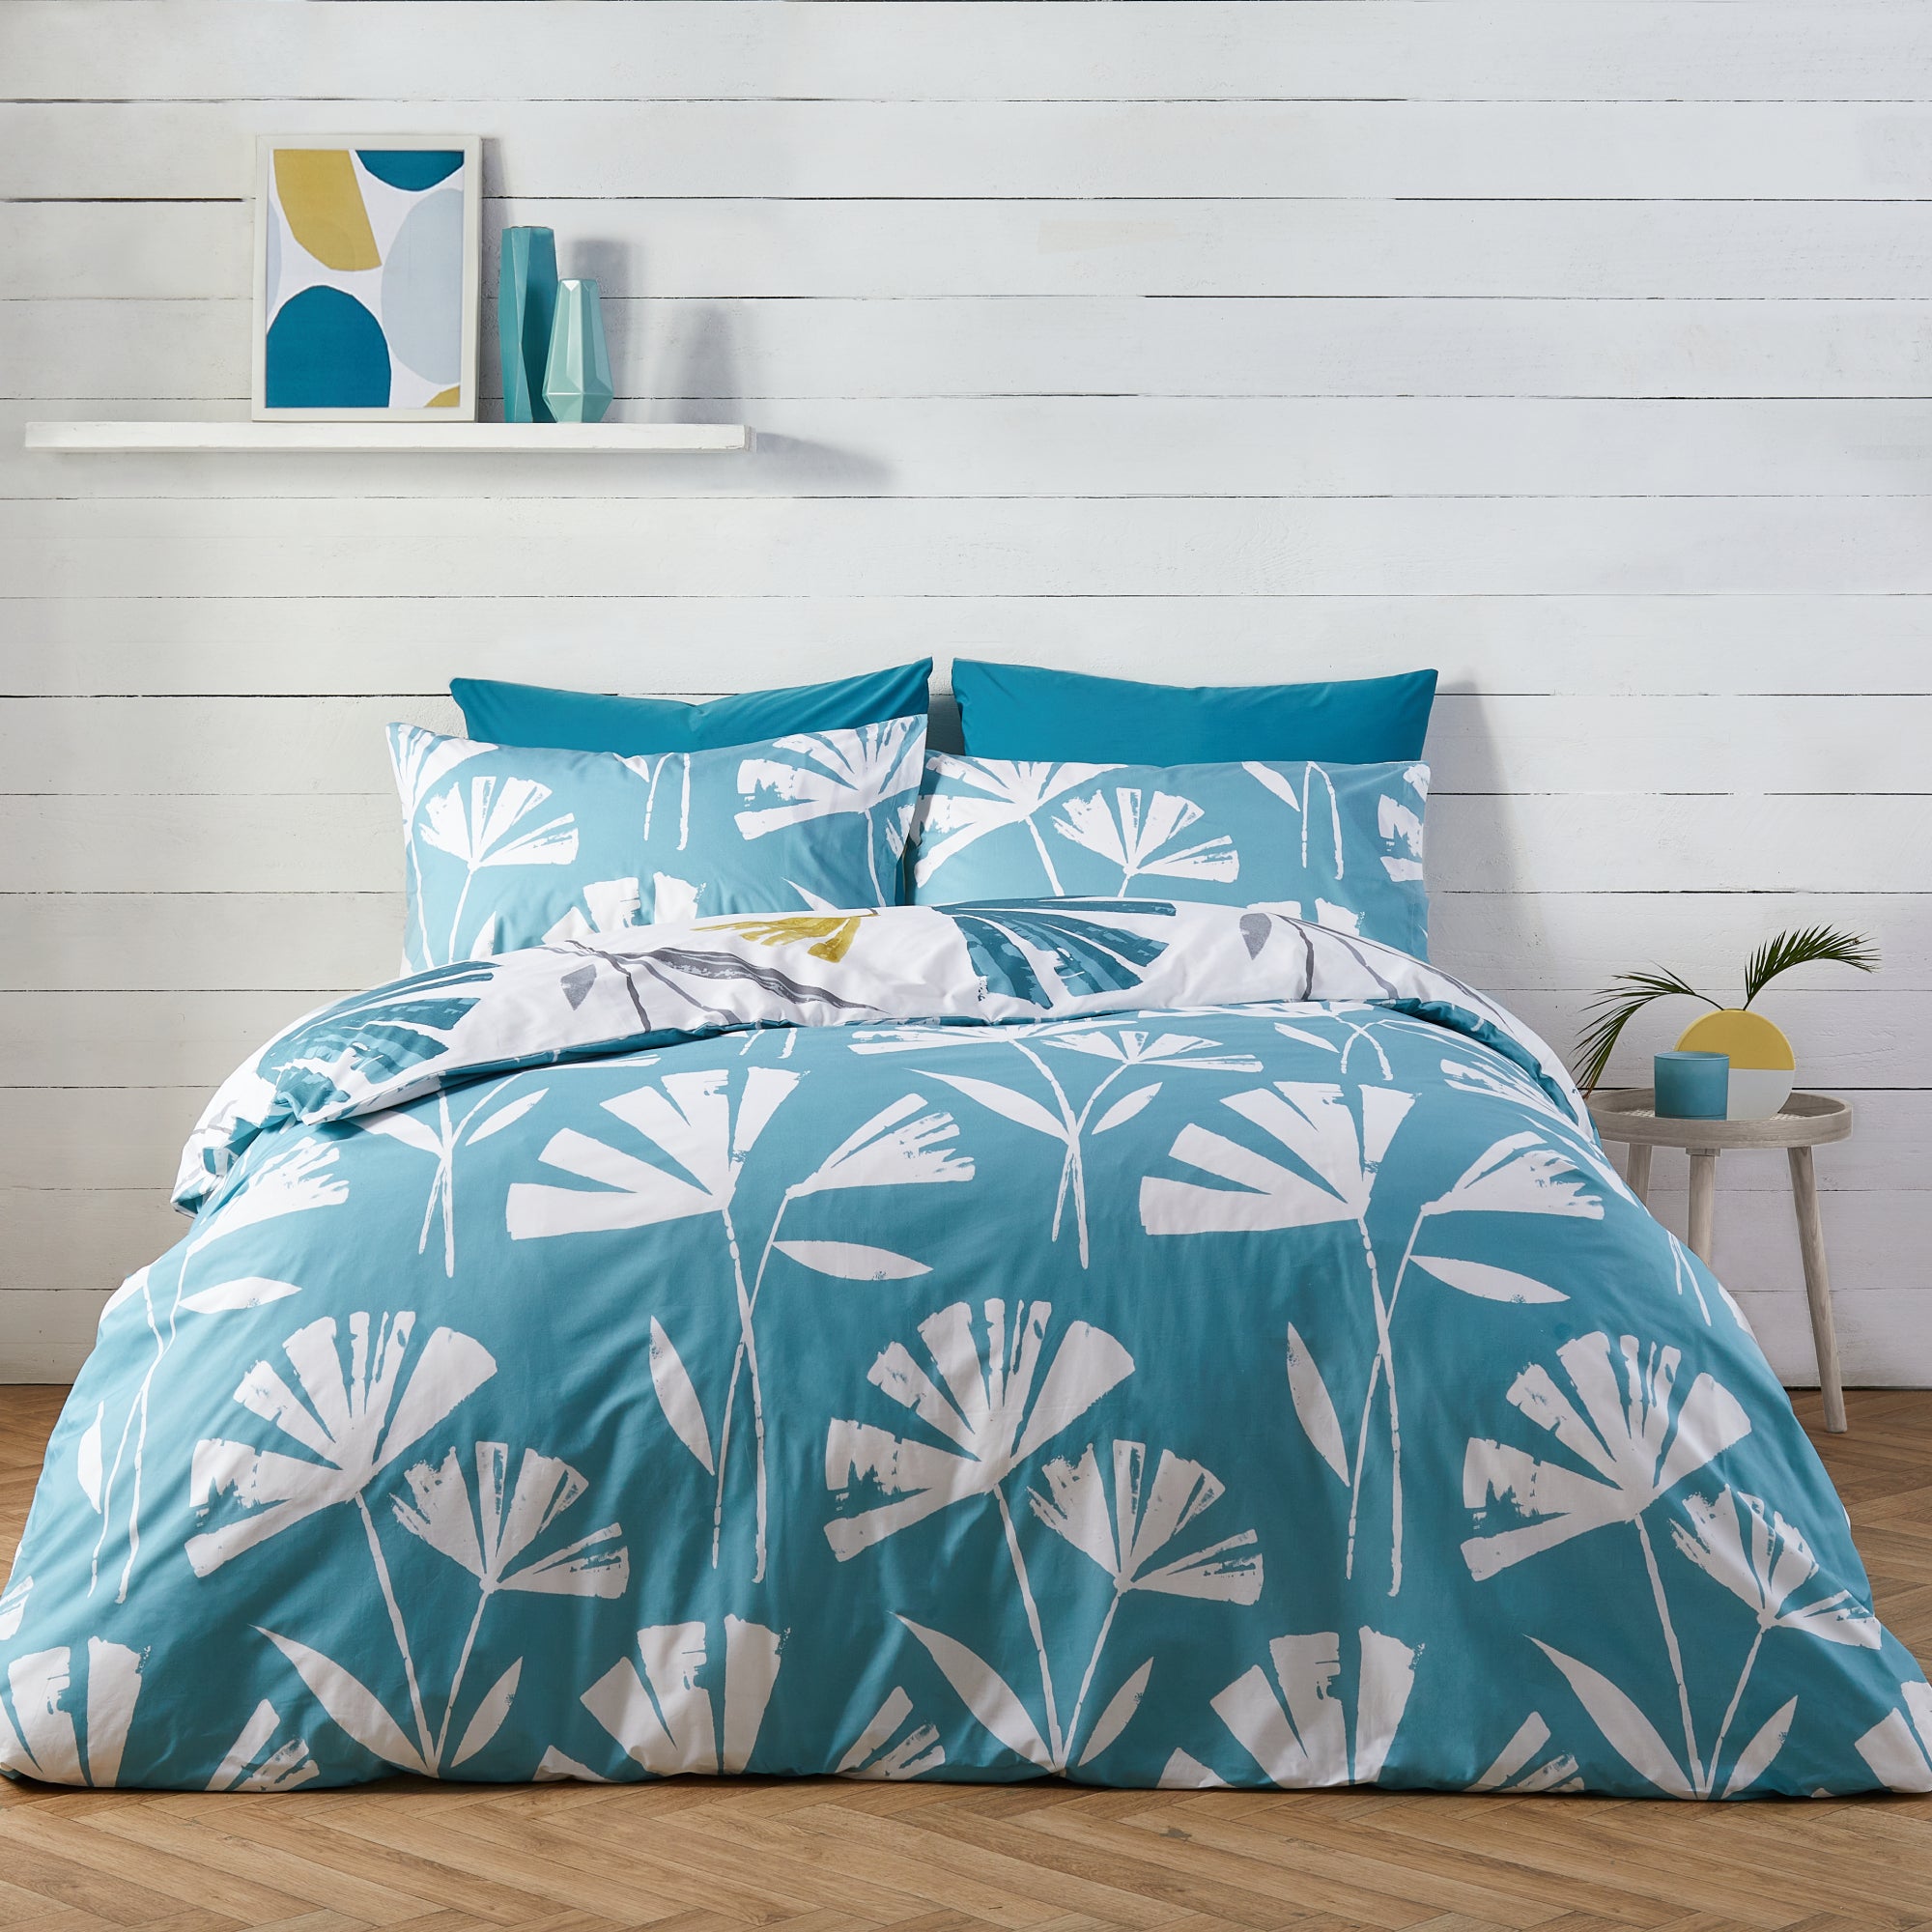 Duvet Cover Set Alma by Fusion in Teal